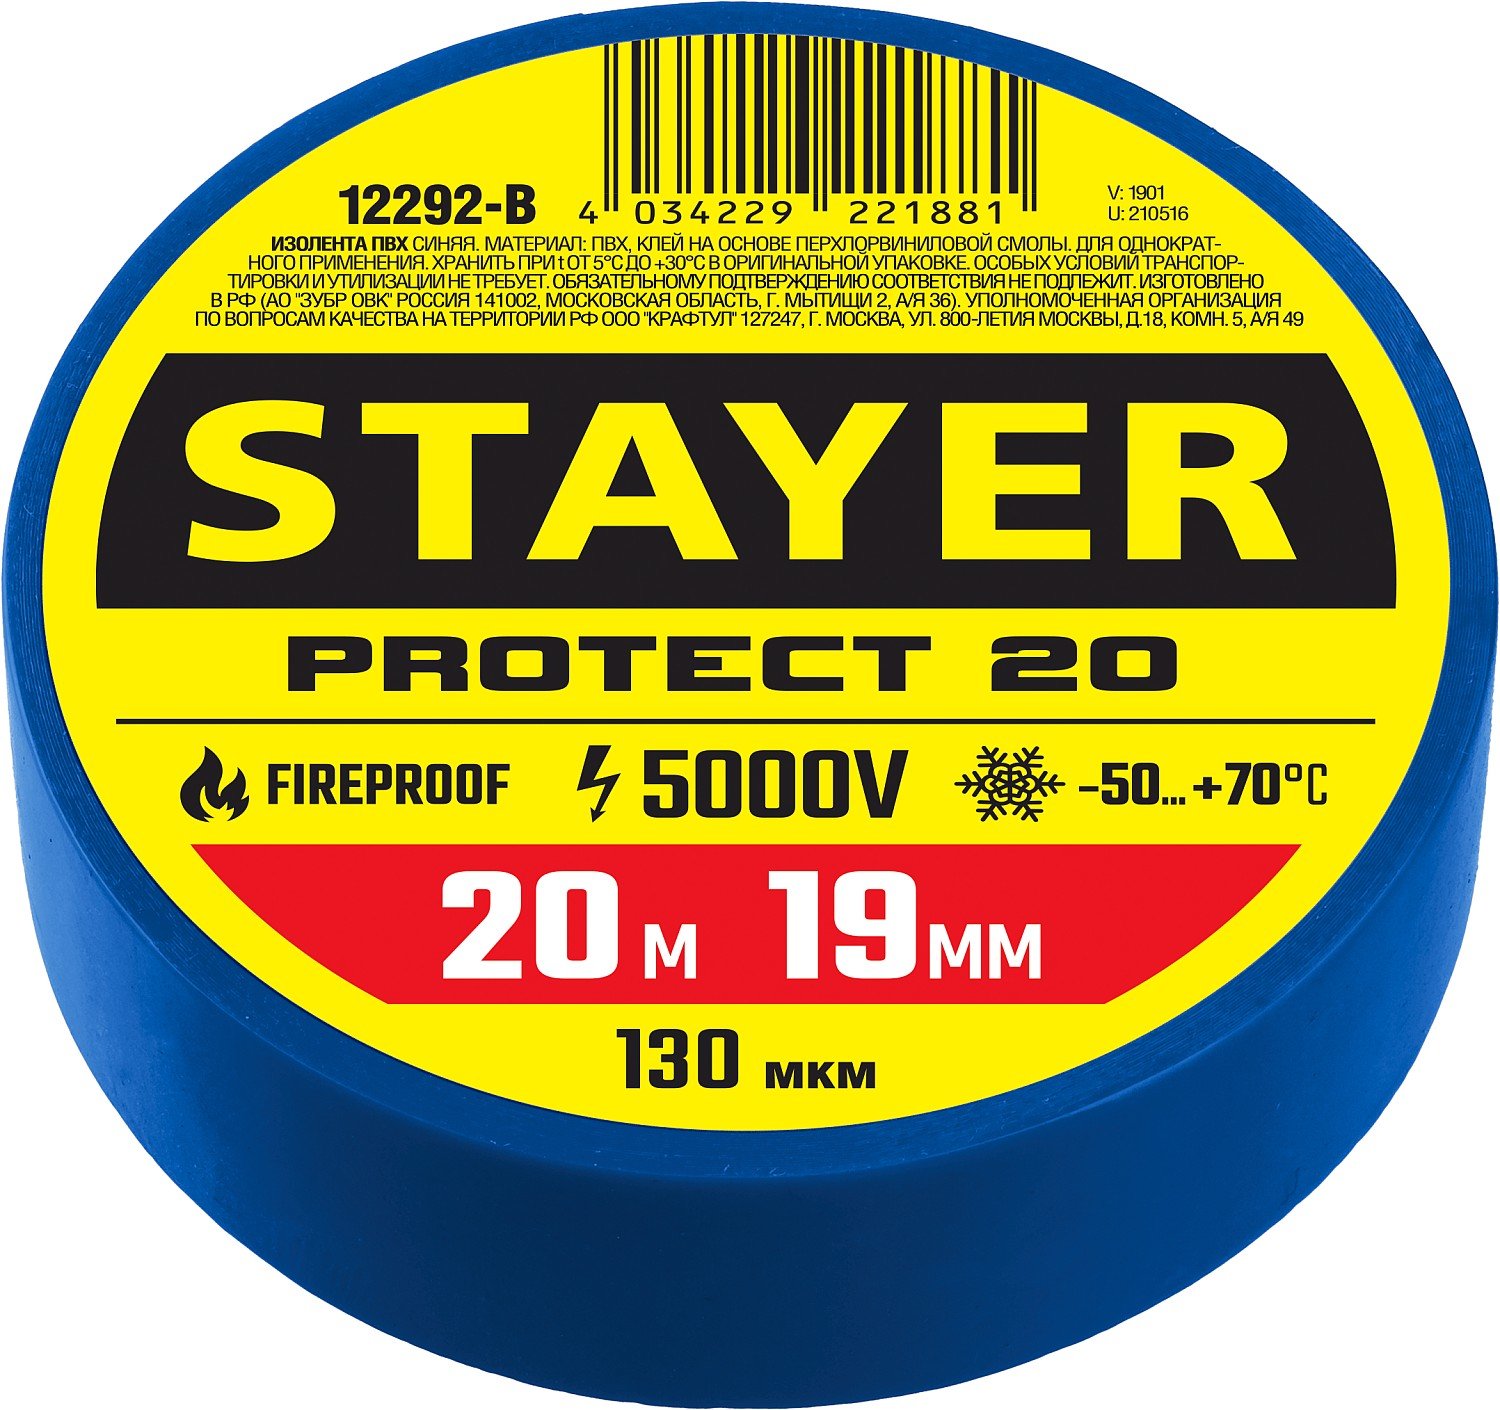    STAYER Protect-20 19   20   (12292-B)